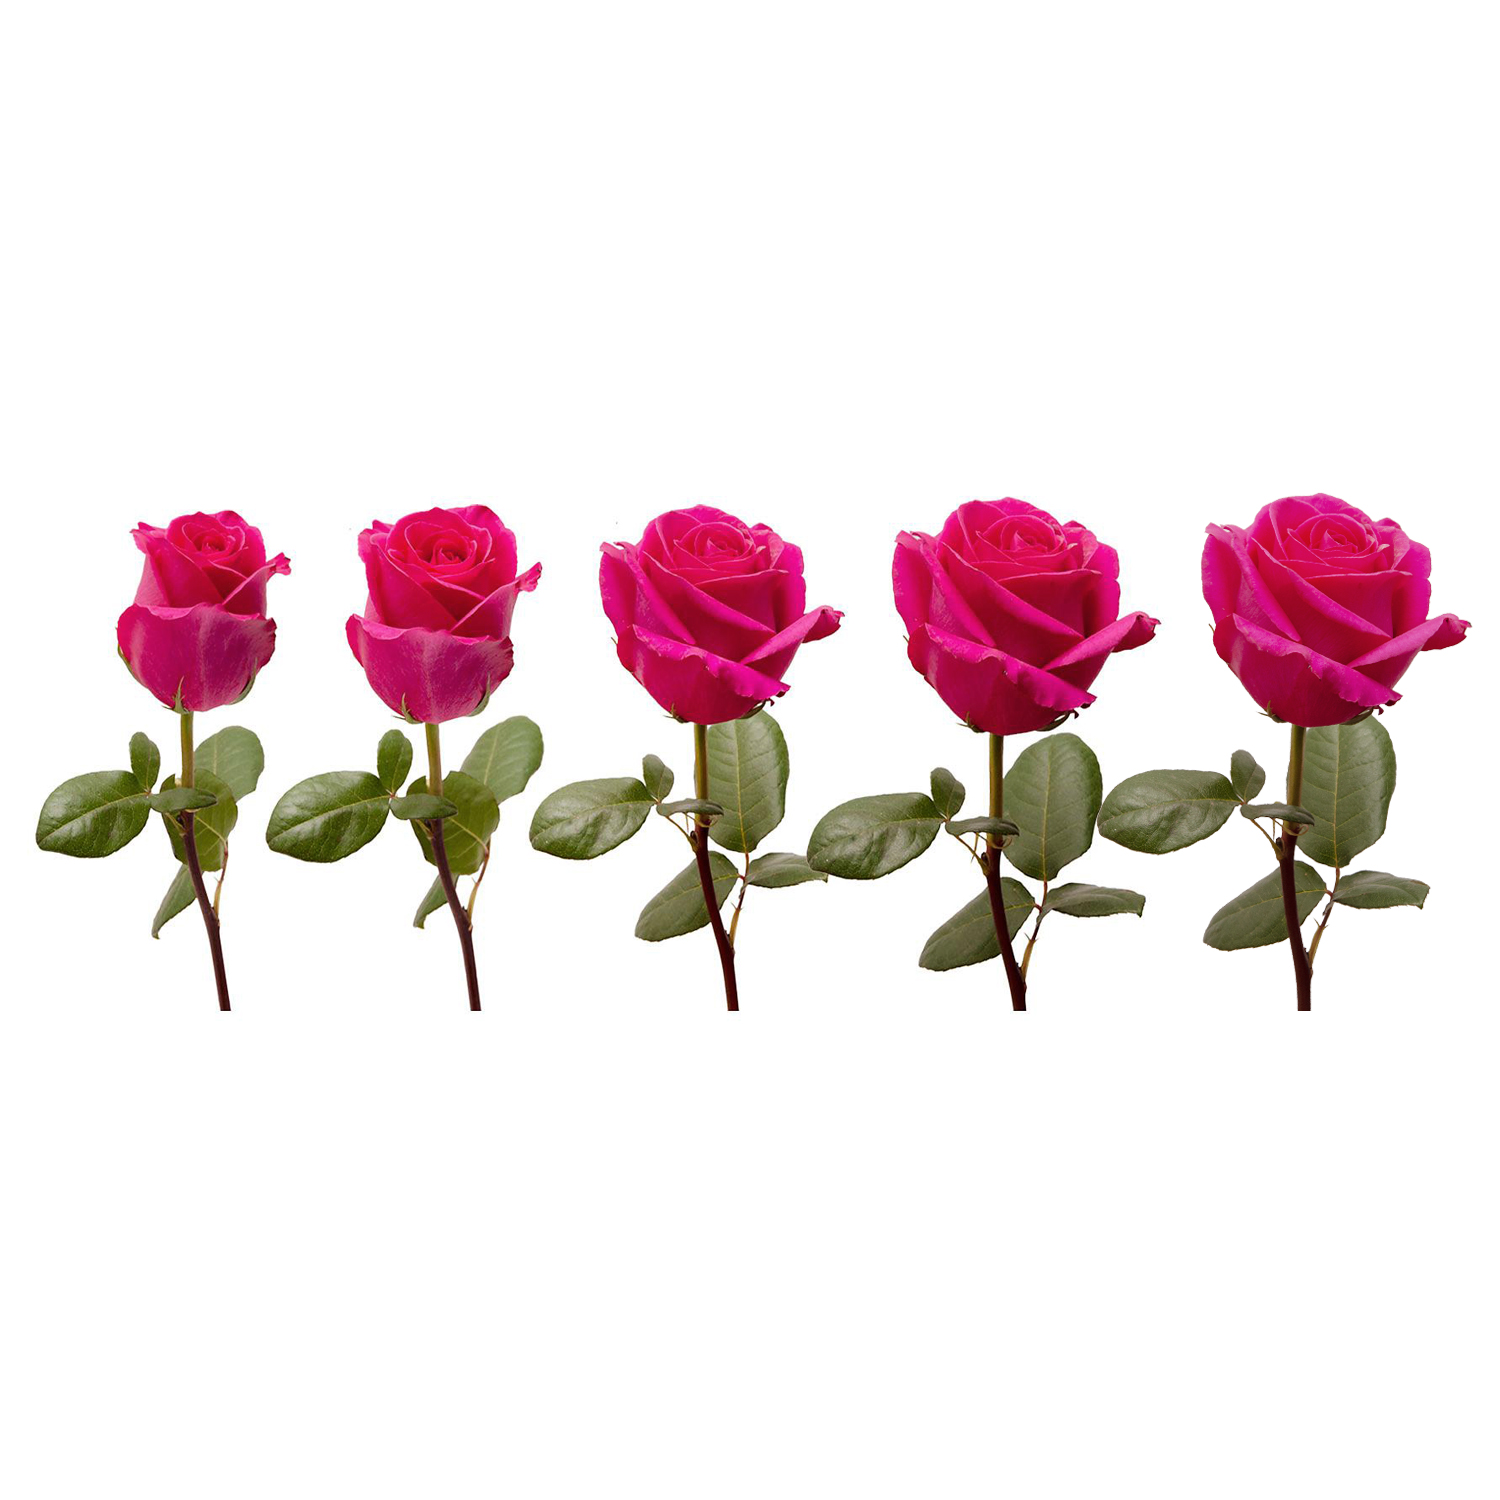 Hot Pink Roses - Farm Direct Fresh Cut Flowers - 50 Stems - Roses -by Bloomingmore - image 5 of 7